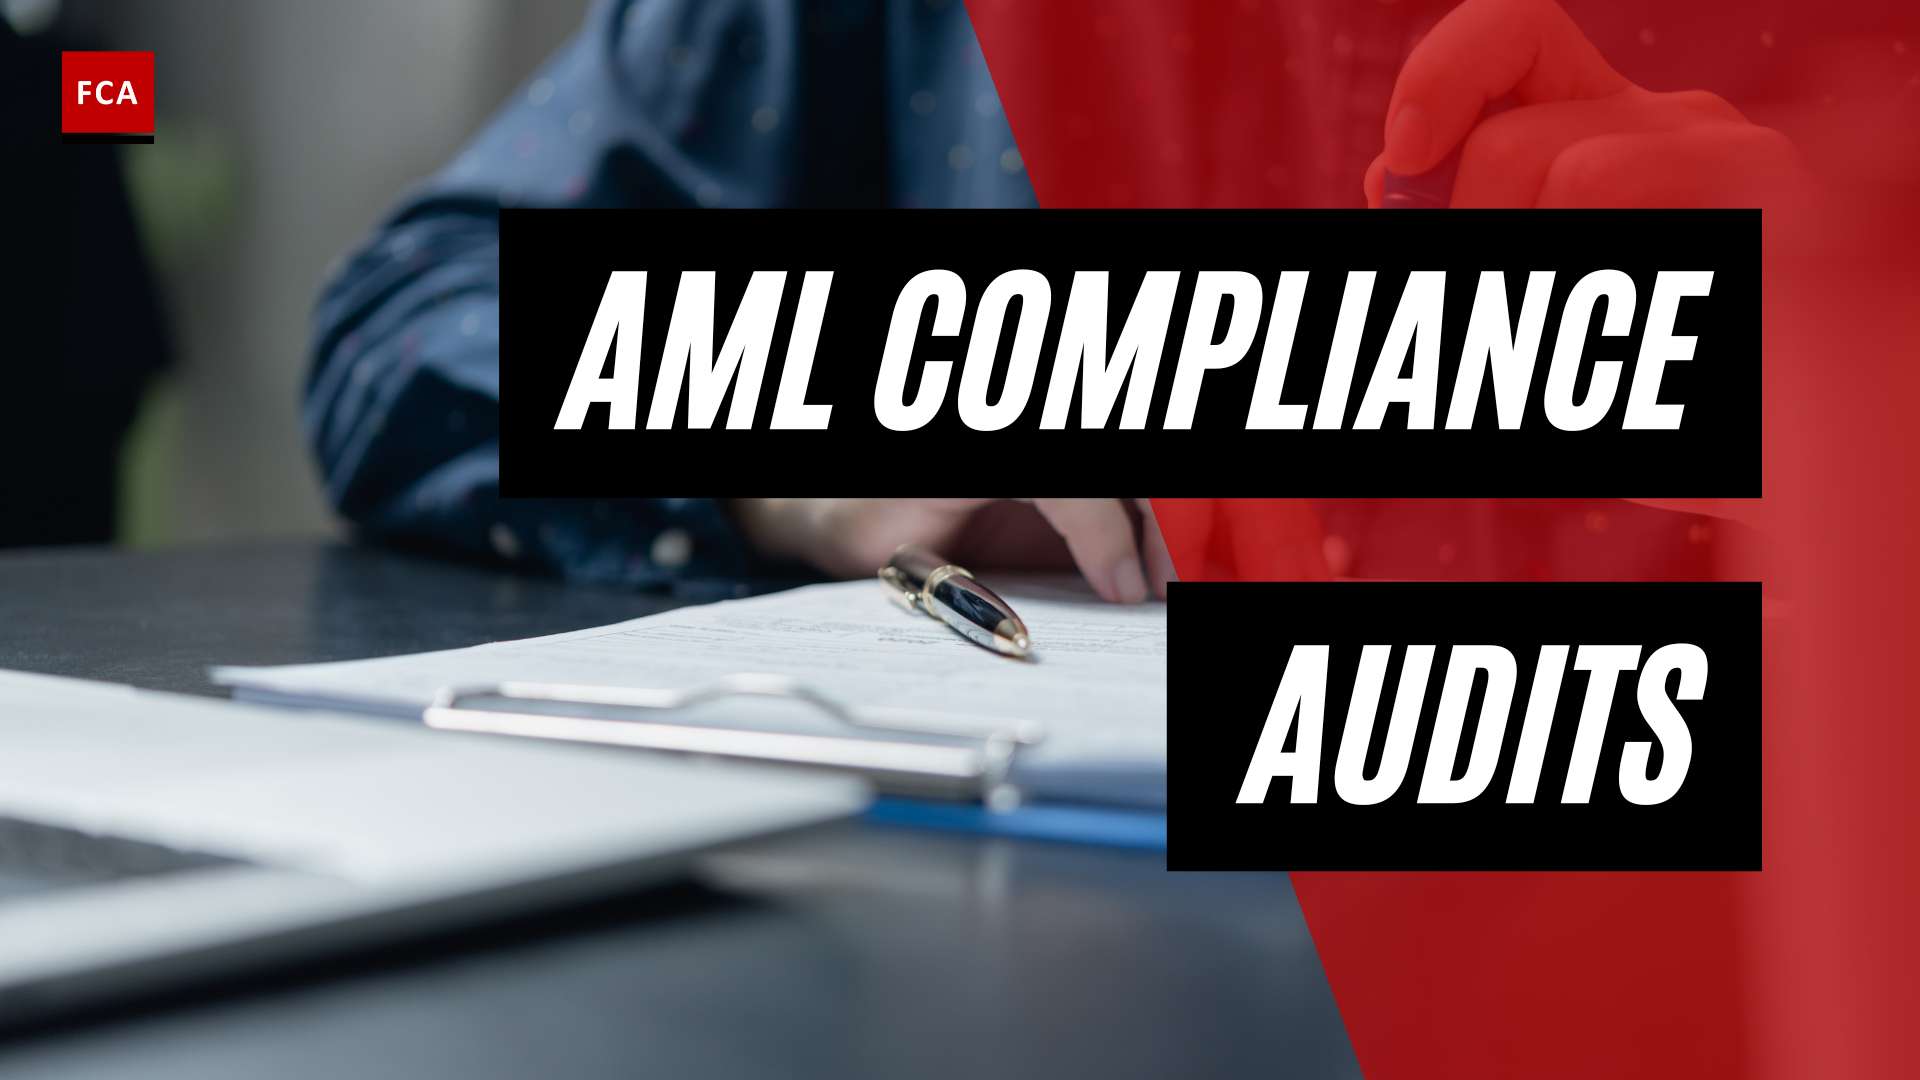 Staying Ahead Of The Game: Aml Compliance Audit Insights